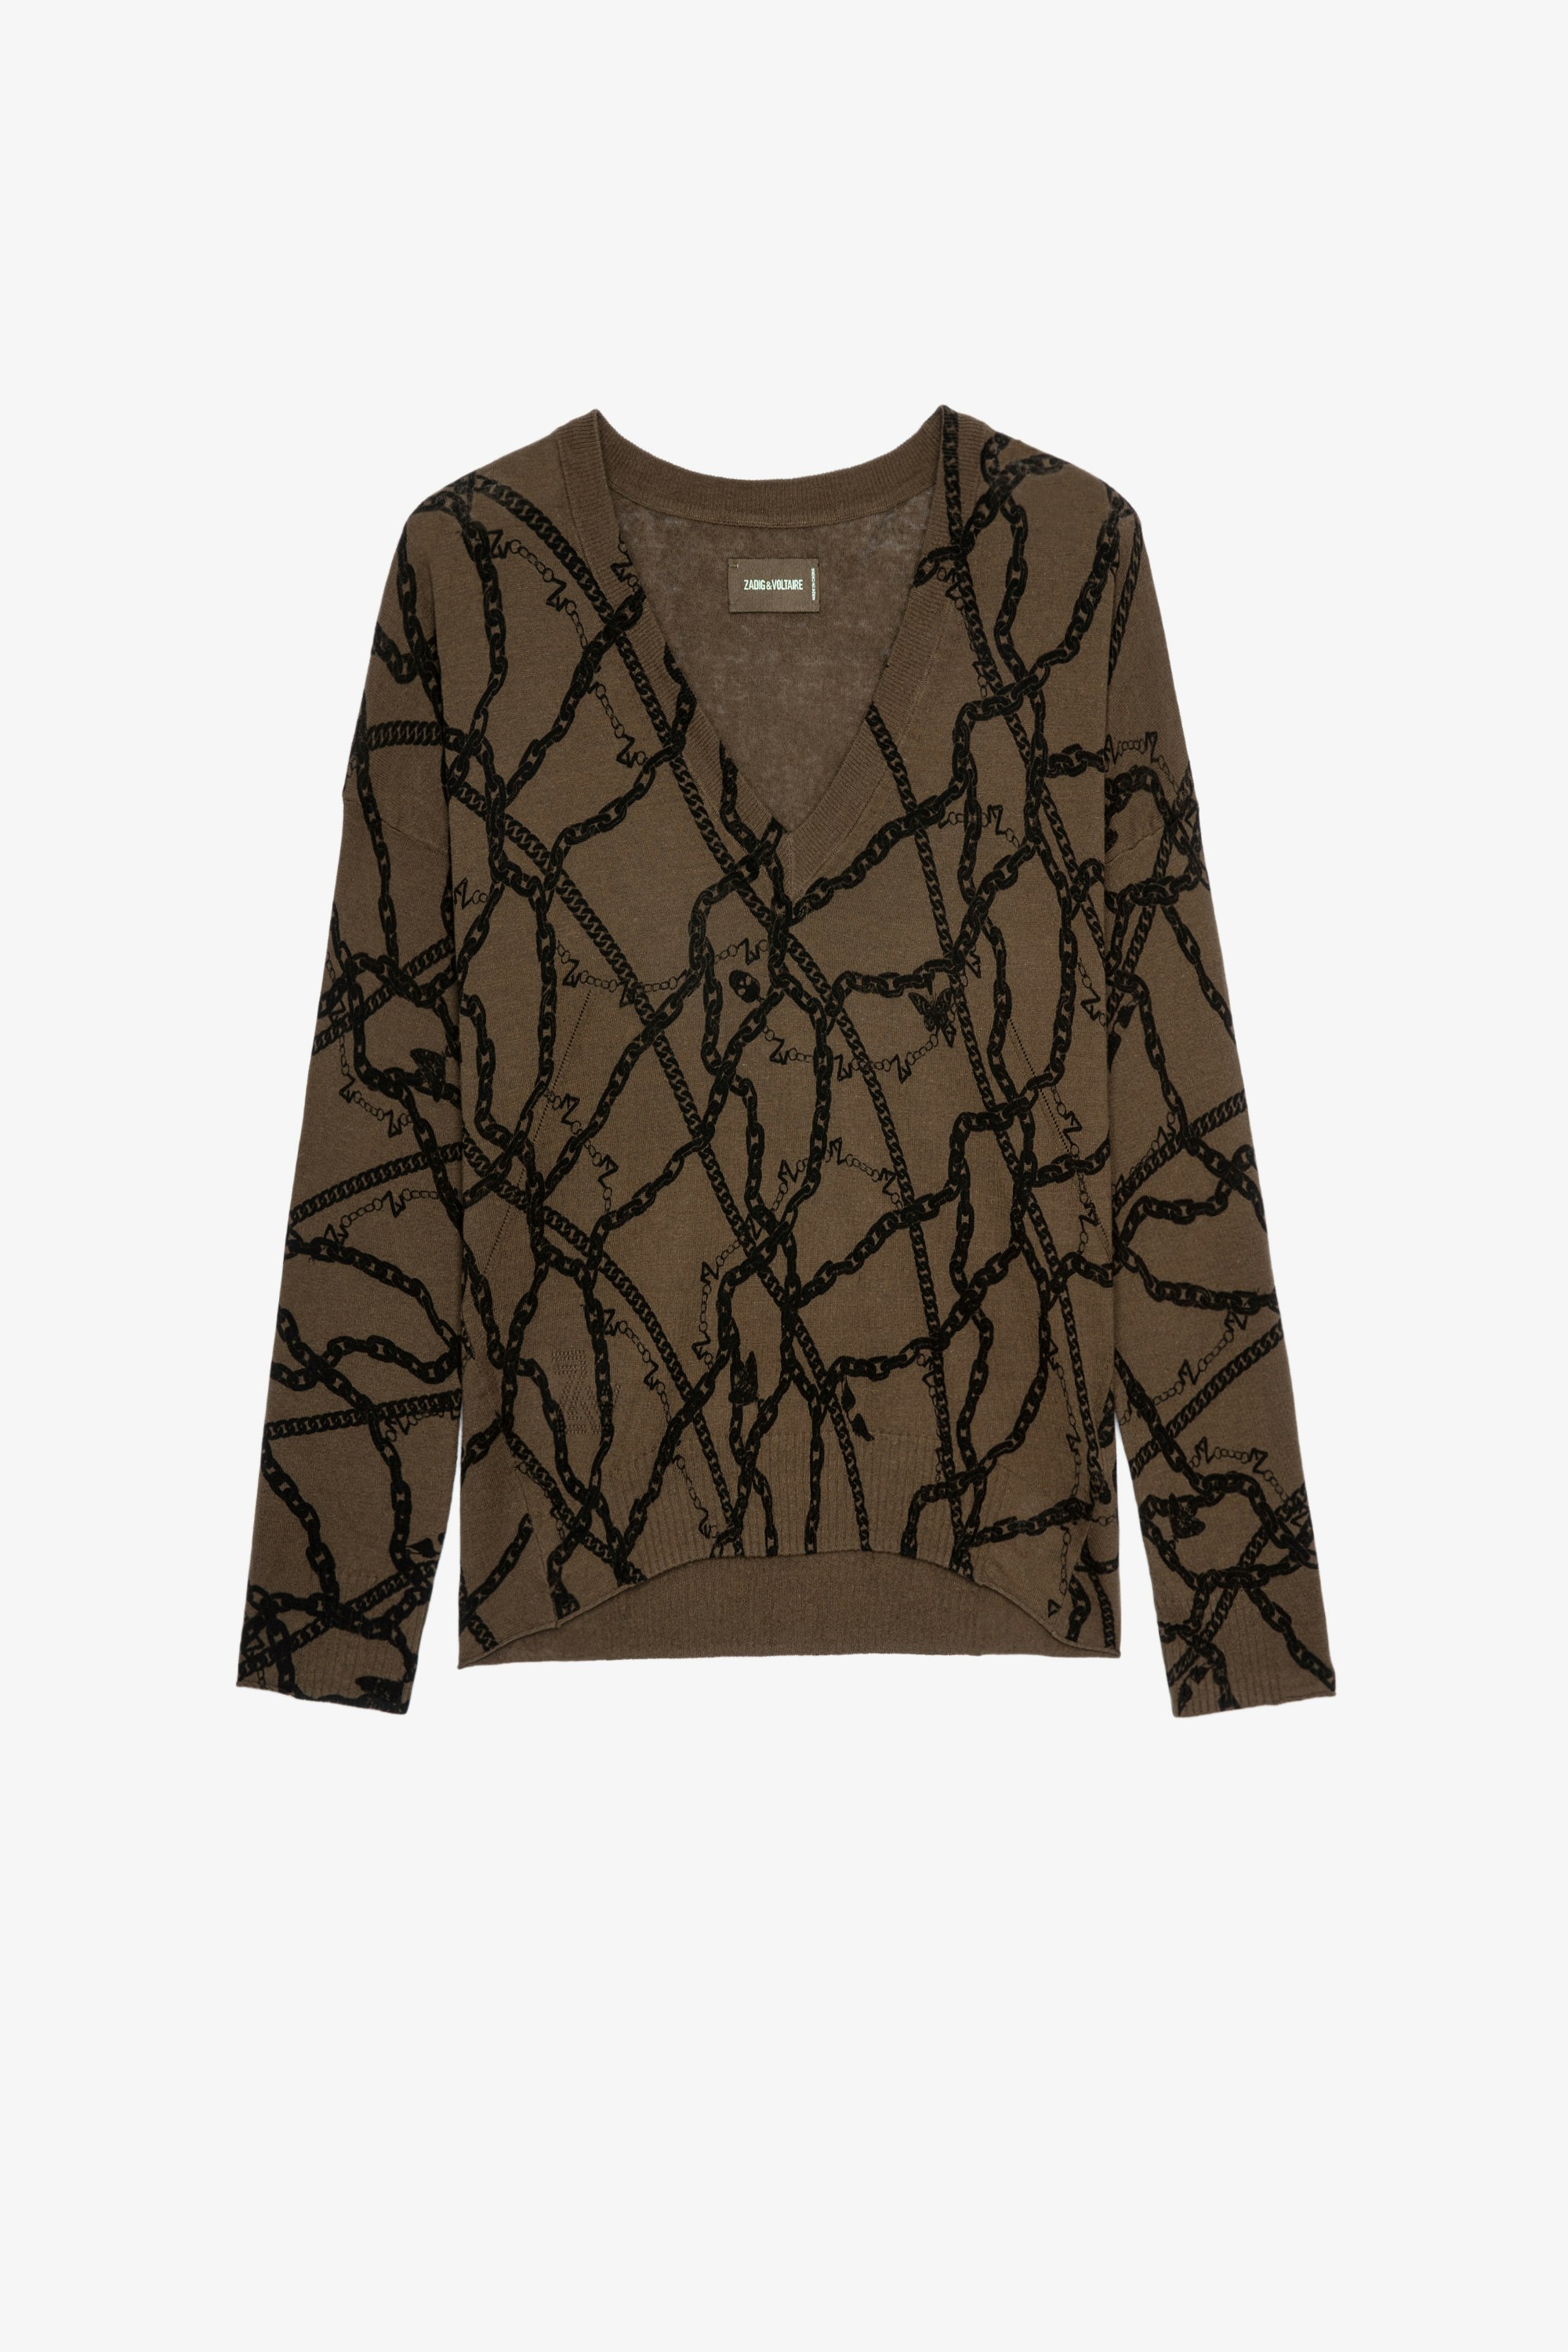 Brumy Chains ニット Women's bronze linen and cotton jumper with chain print 